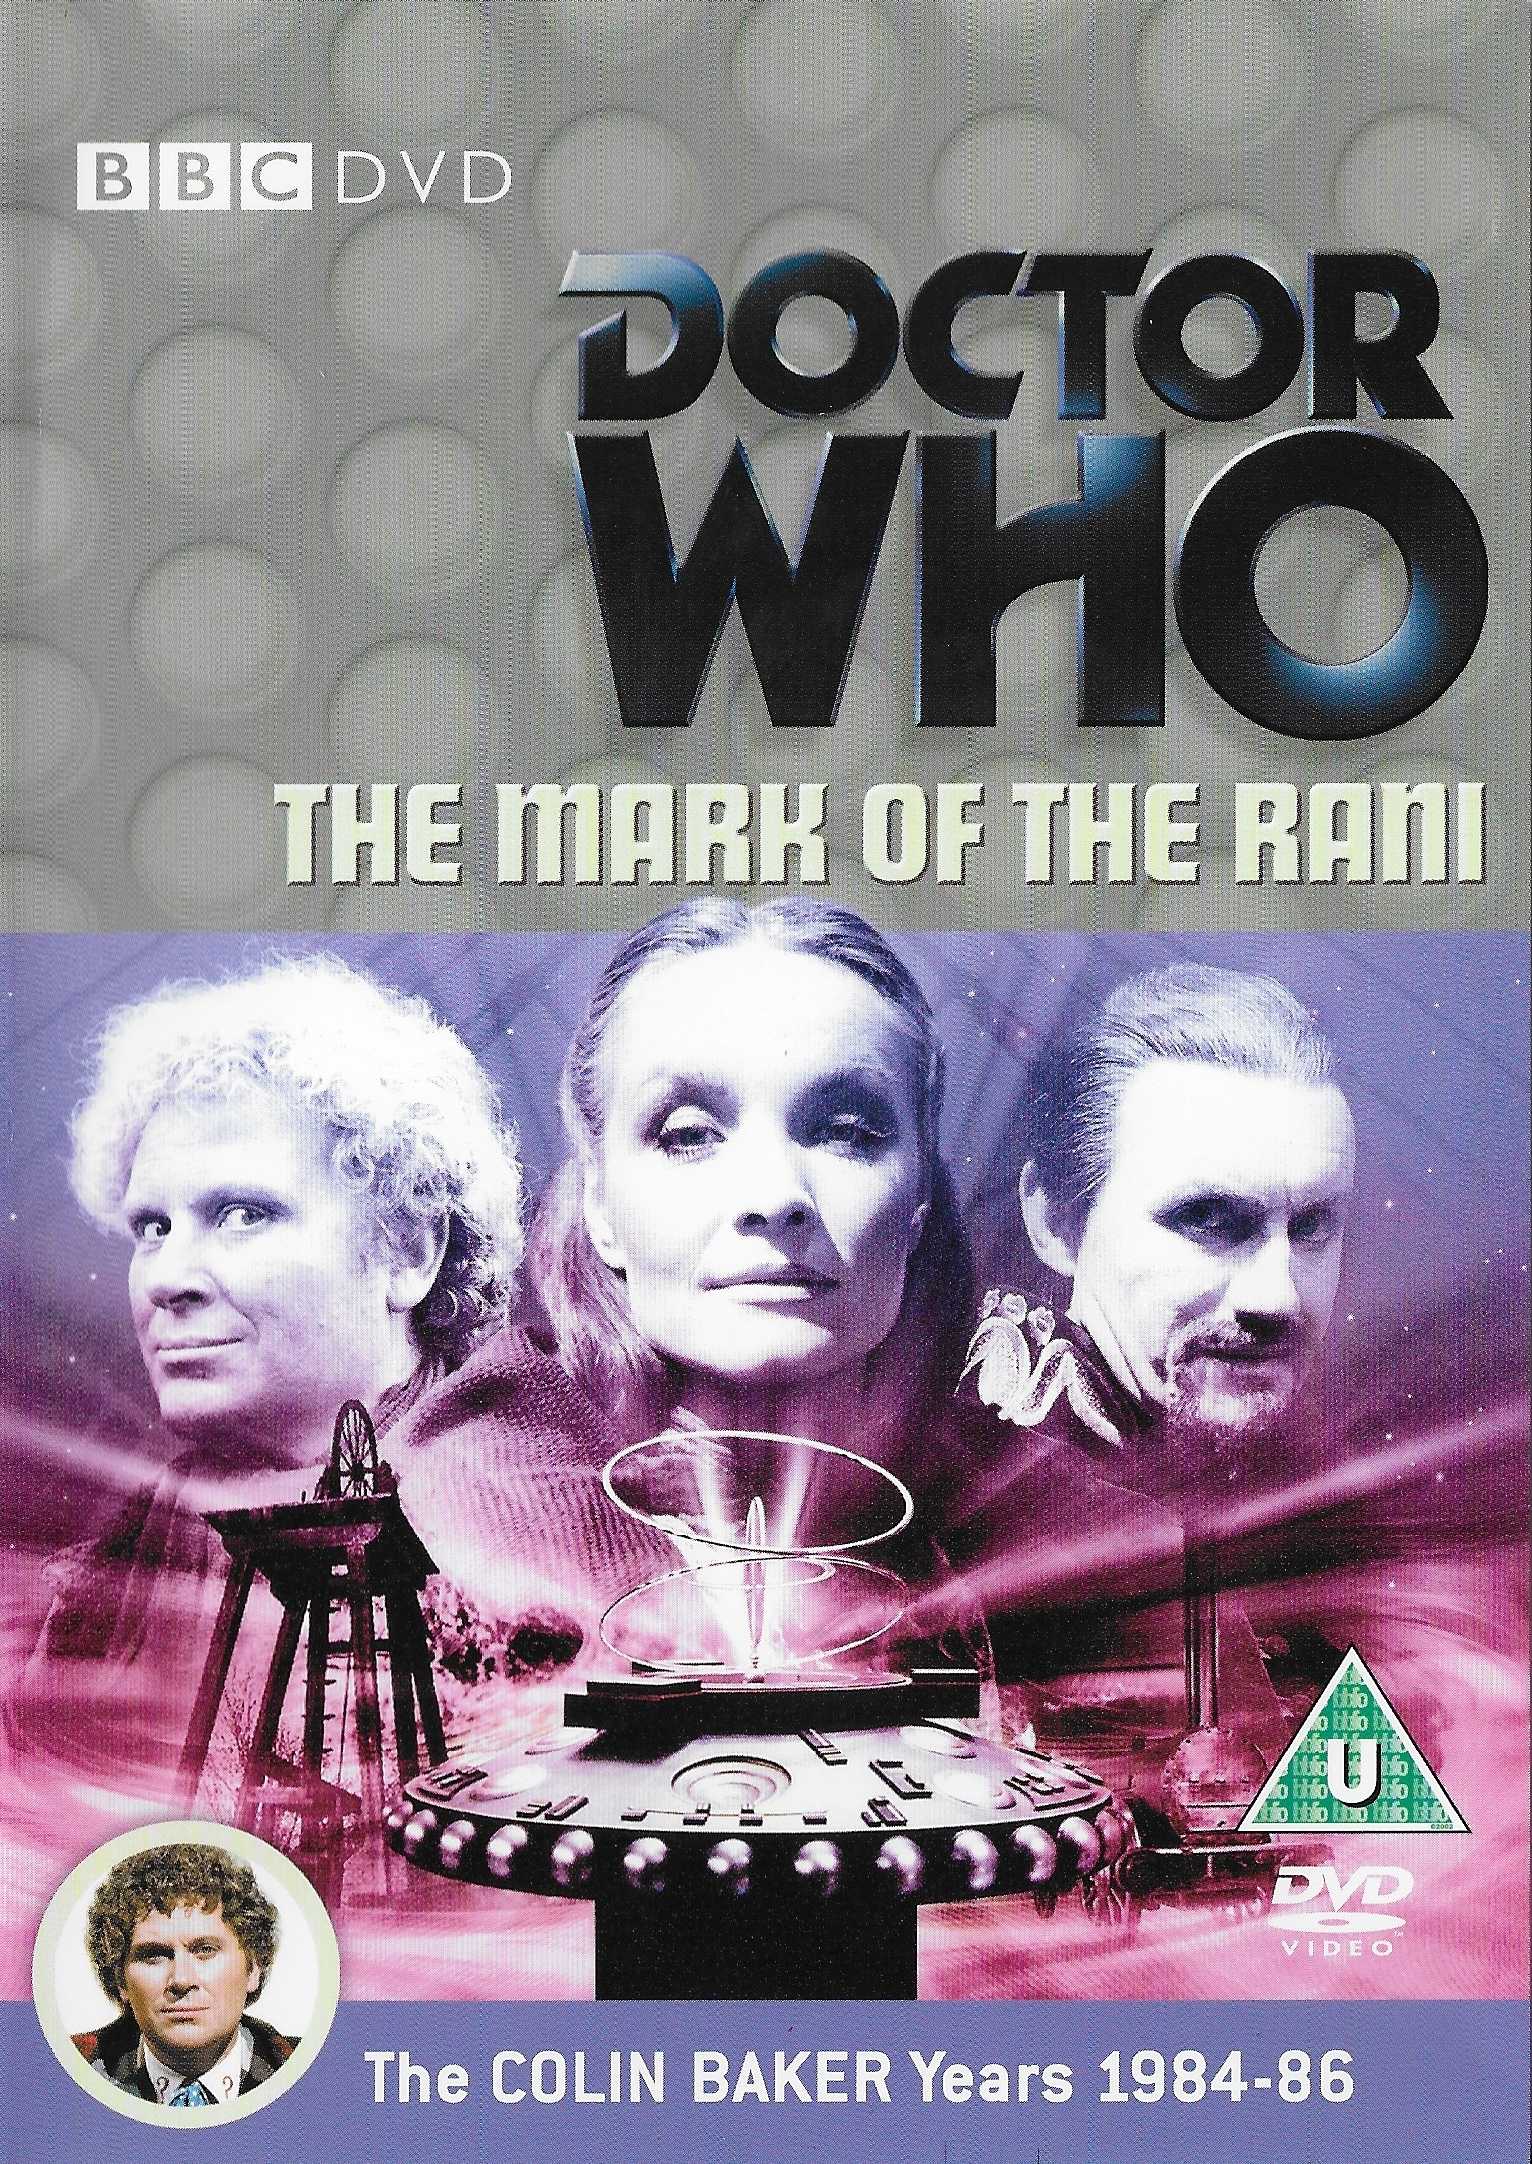 Picture of BBCDVD 2224 Doctor Who - The mark of the Rani by artist Pip and Jane Baker from the BBC dvds - Records and Tapes library